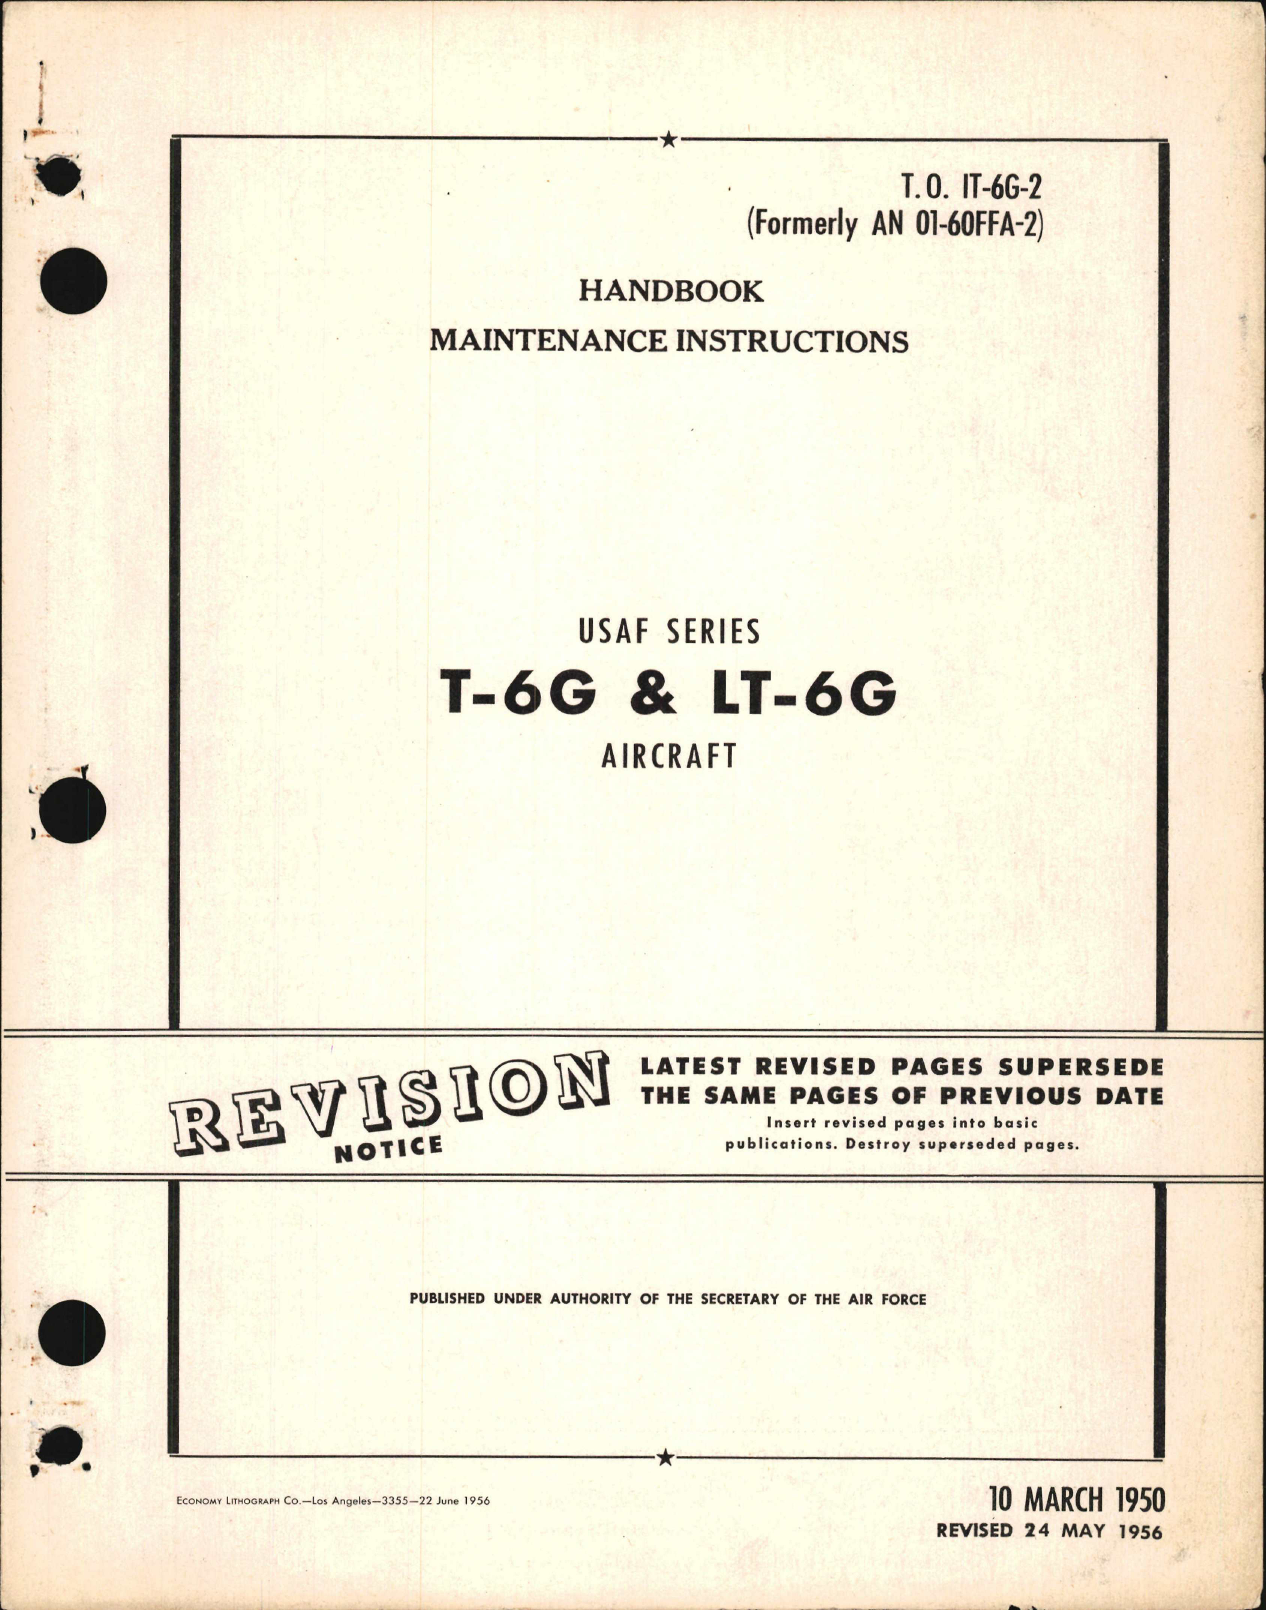 Sample page 1 from AirCorps Library document: Maintenance Instructions for T-6G and LT-6G